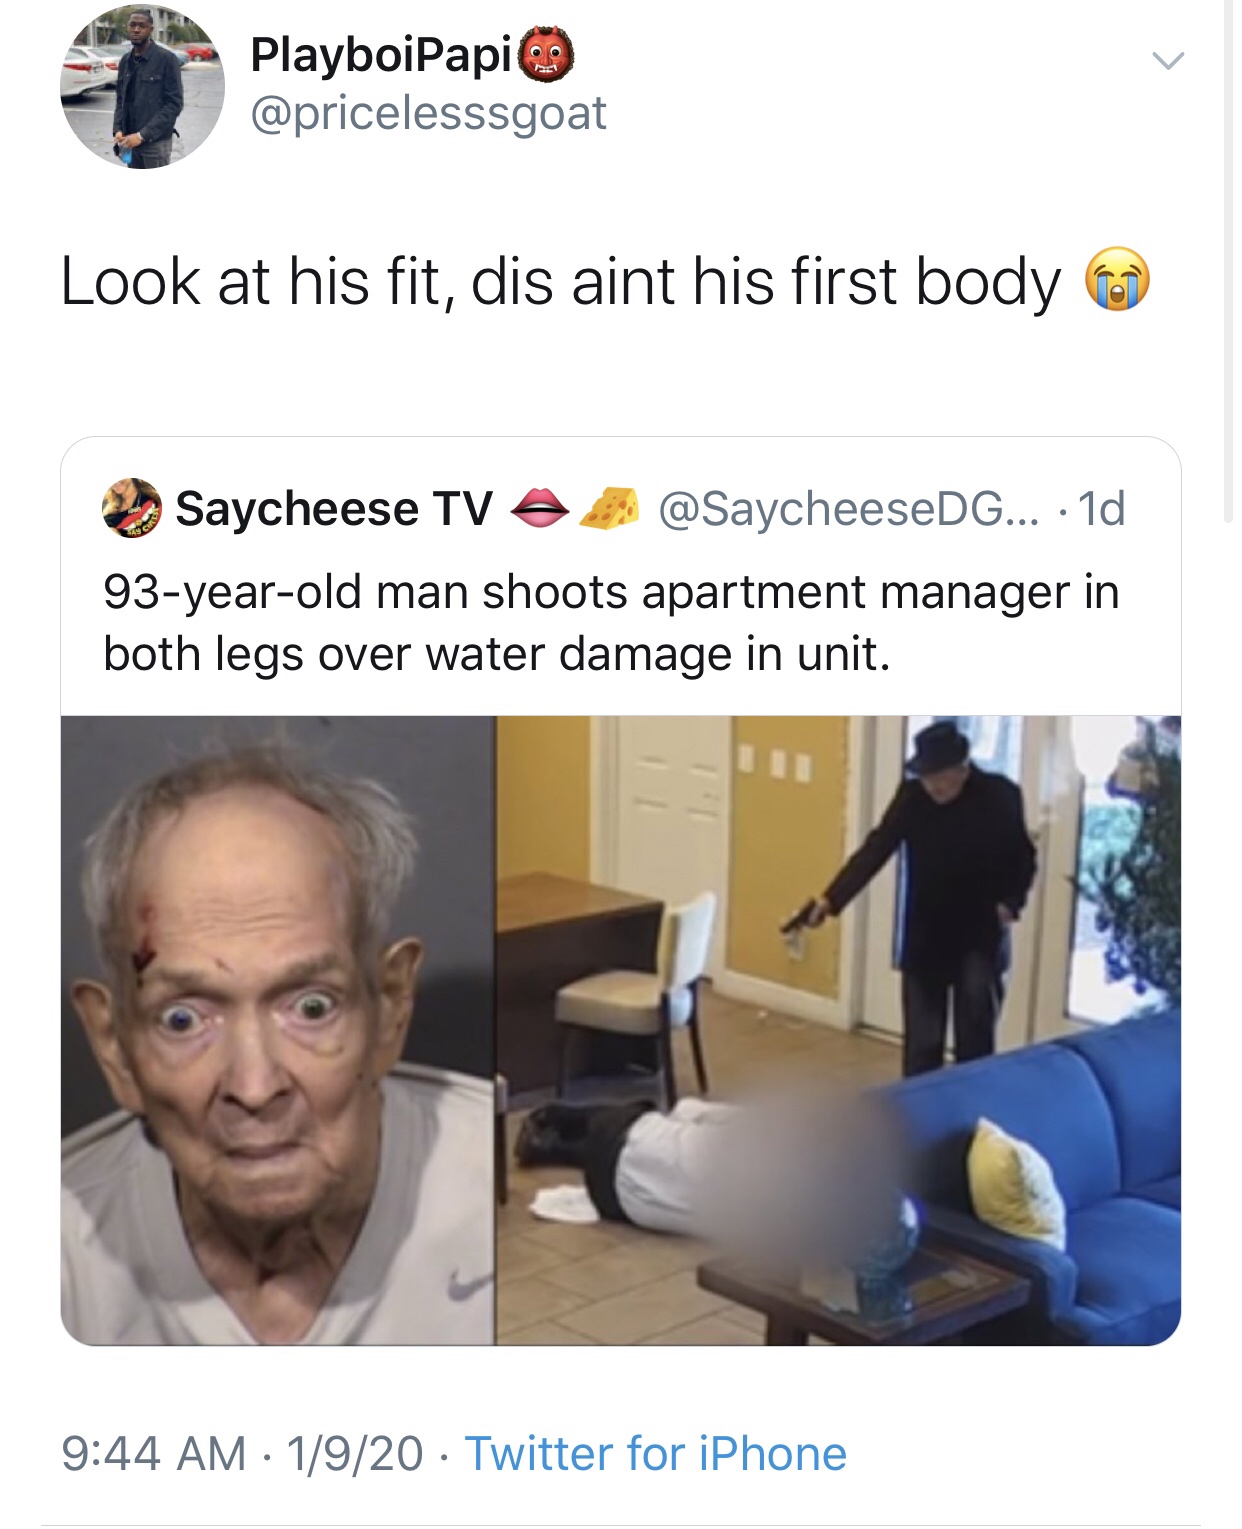 93 year old man shoots apartment manager - PlayboiPapi Look at his fit, dis aint his first body Saycheese Tv A ... 1d 93yearold man shoots apartment manager in both legs over water damage in unit. 1920 Twitter for iPhone